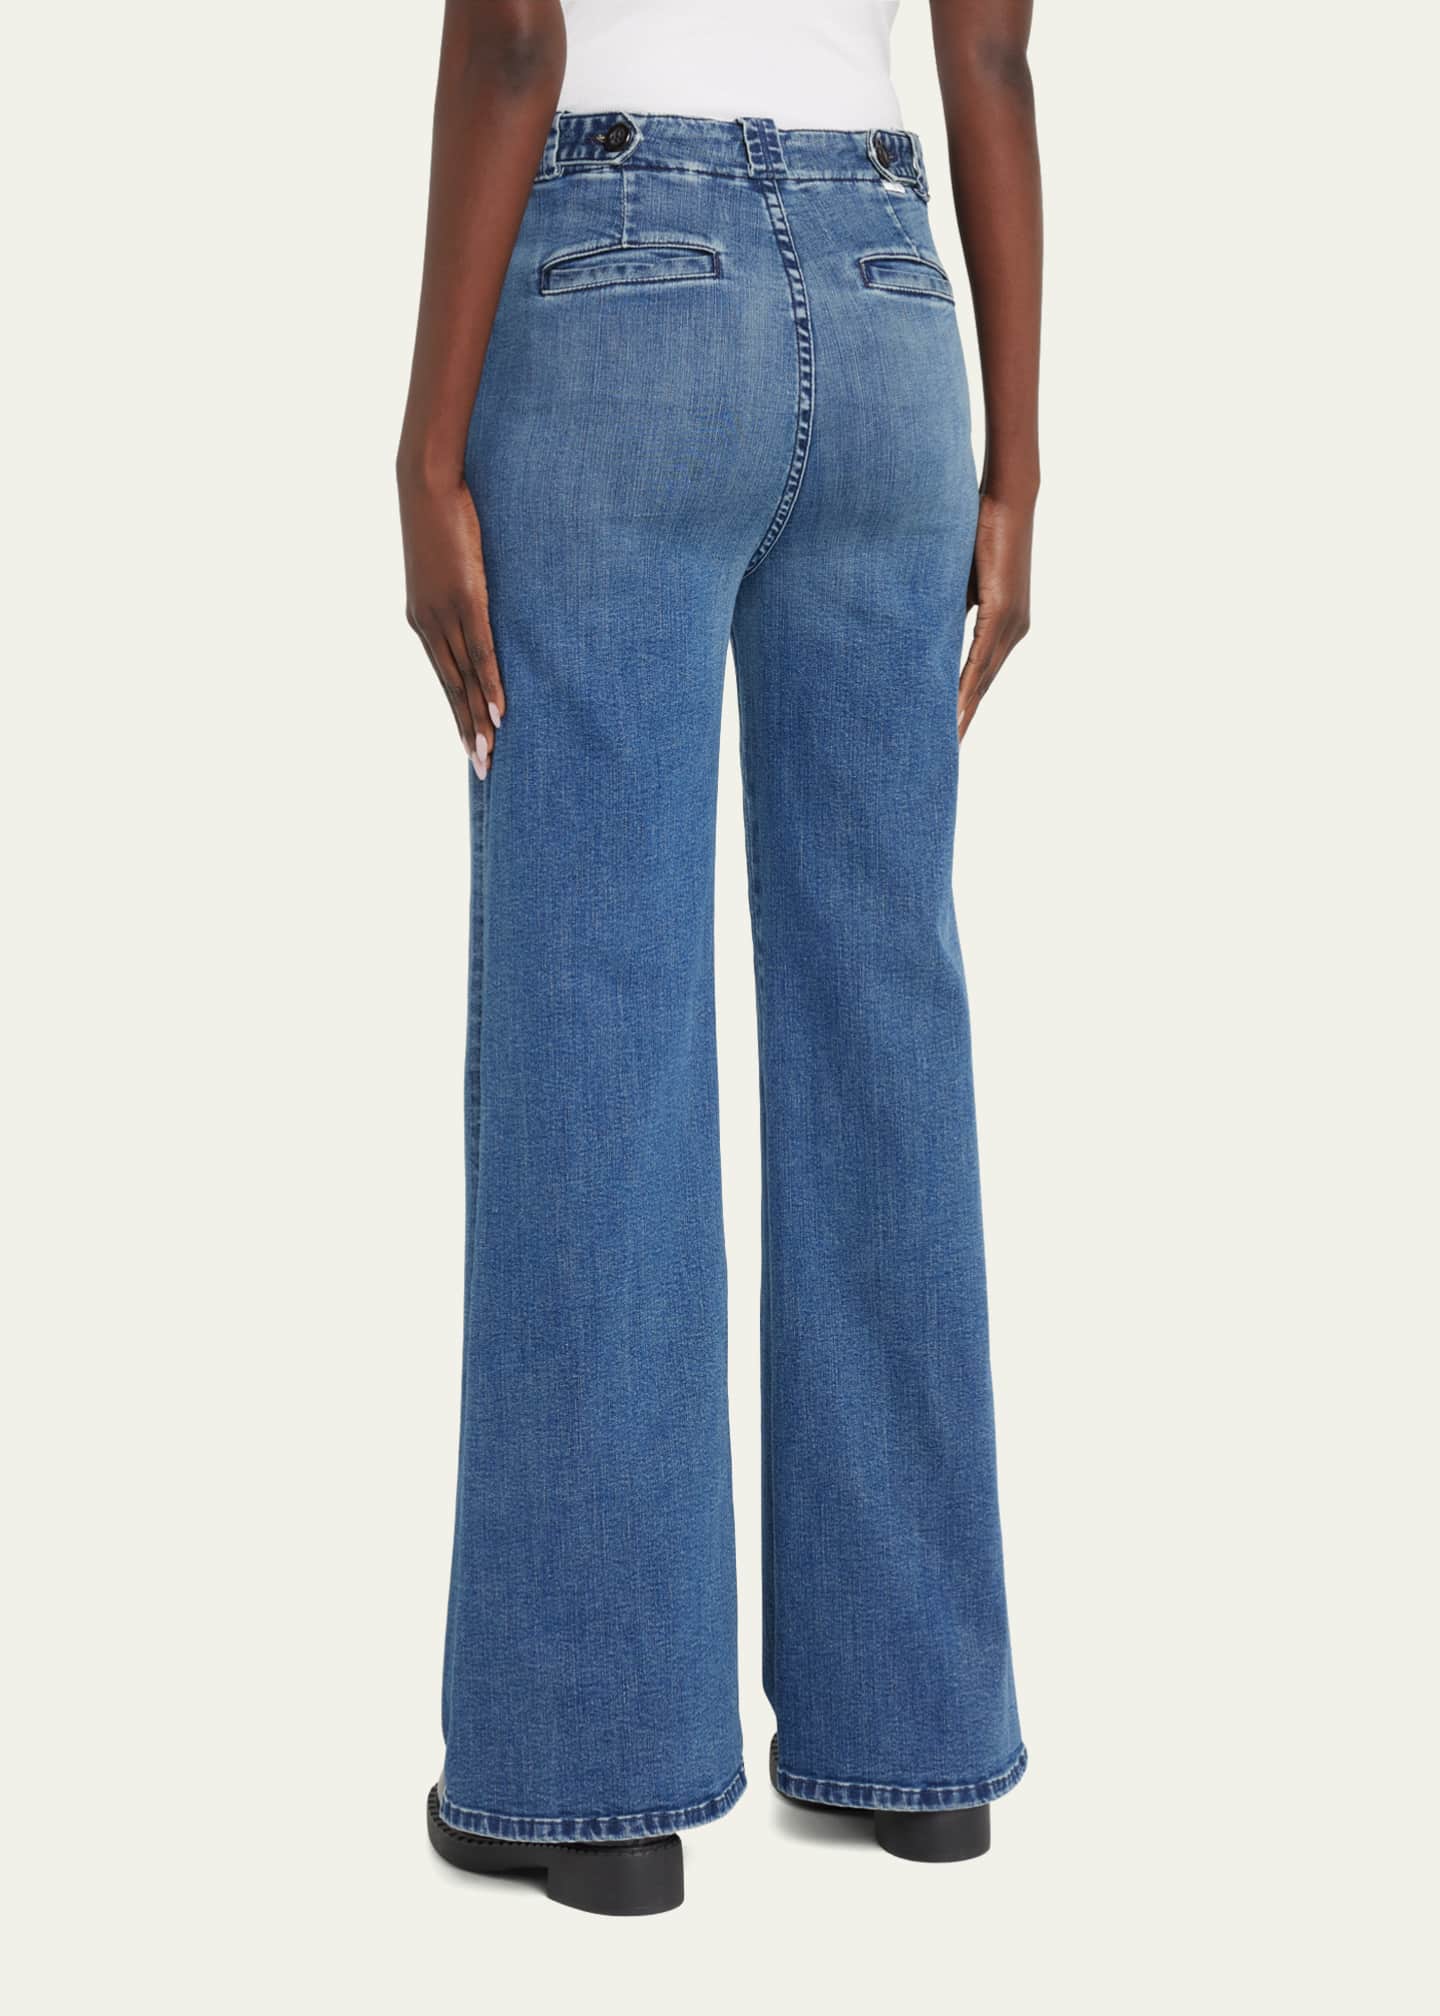 MOTHER The Elbow Grease Roller Sneak Jeans - Bergdorf Goodman